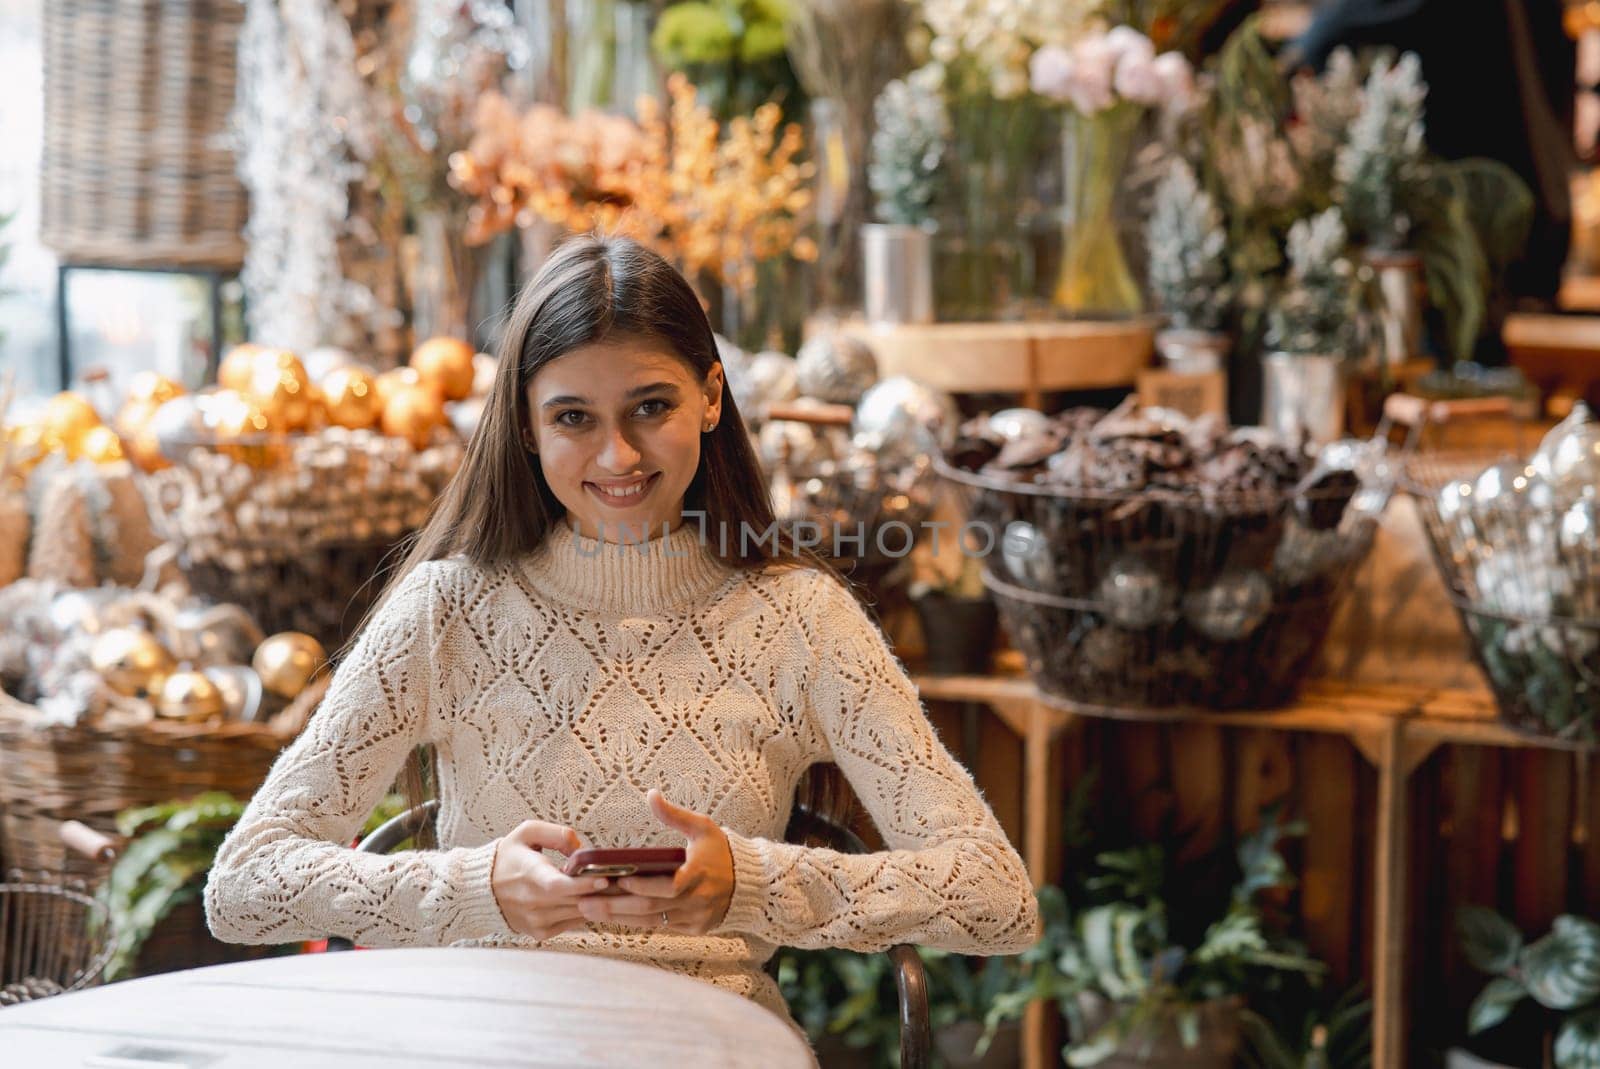 A captivating, colorful girl admiring Christmas decor and browsing her smartphone. High quality photo